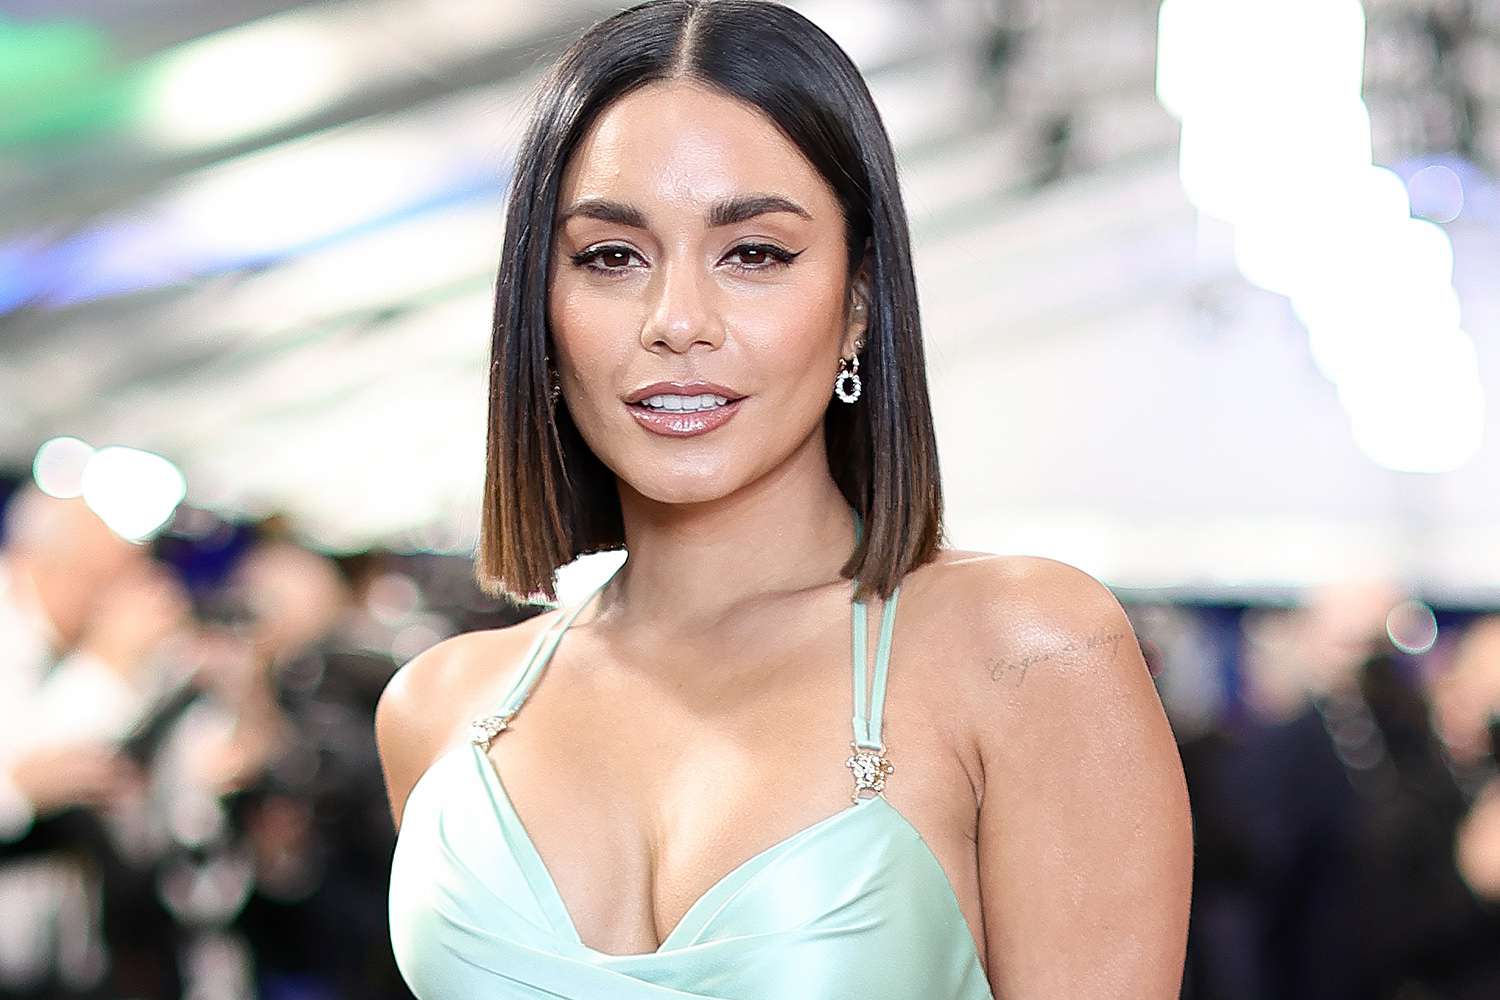 Happy Birthday Vanessa Hudgens: 7 Hot and Sexy Pictures of the "The Princess Switch" Star